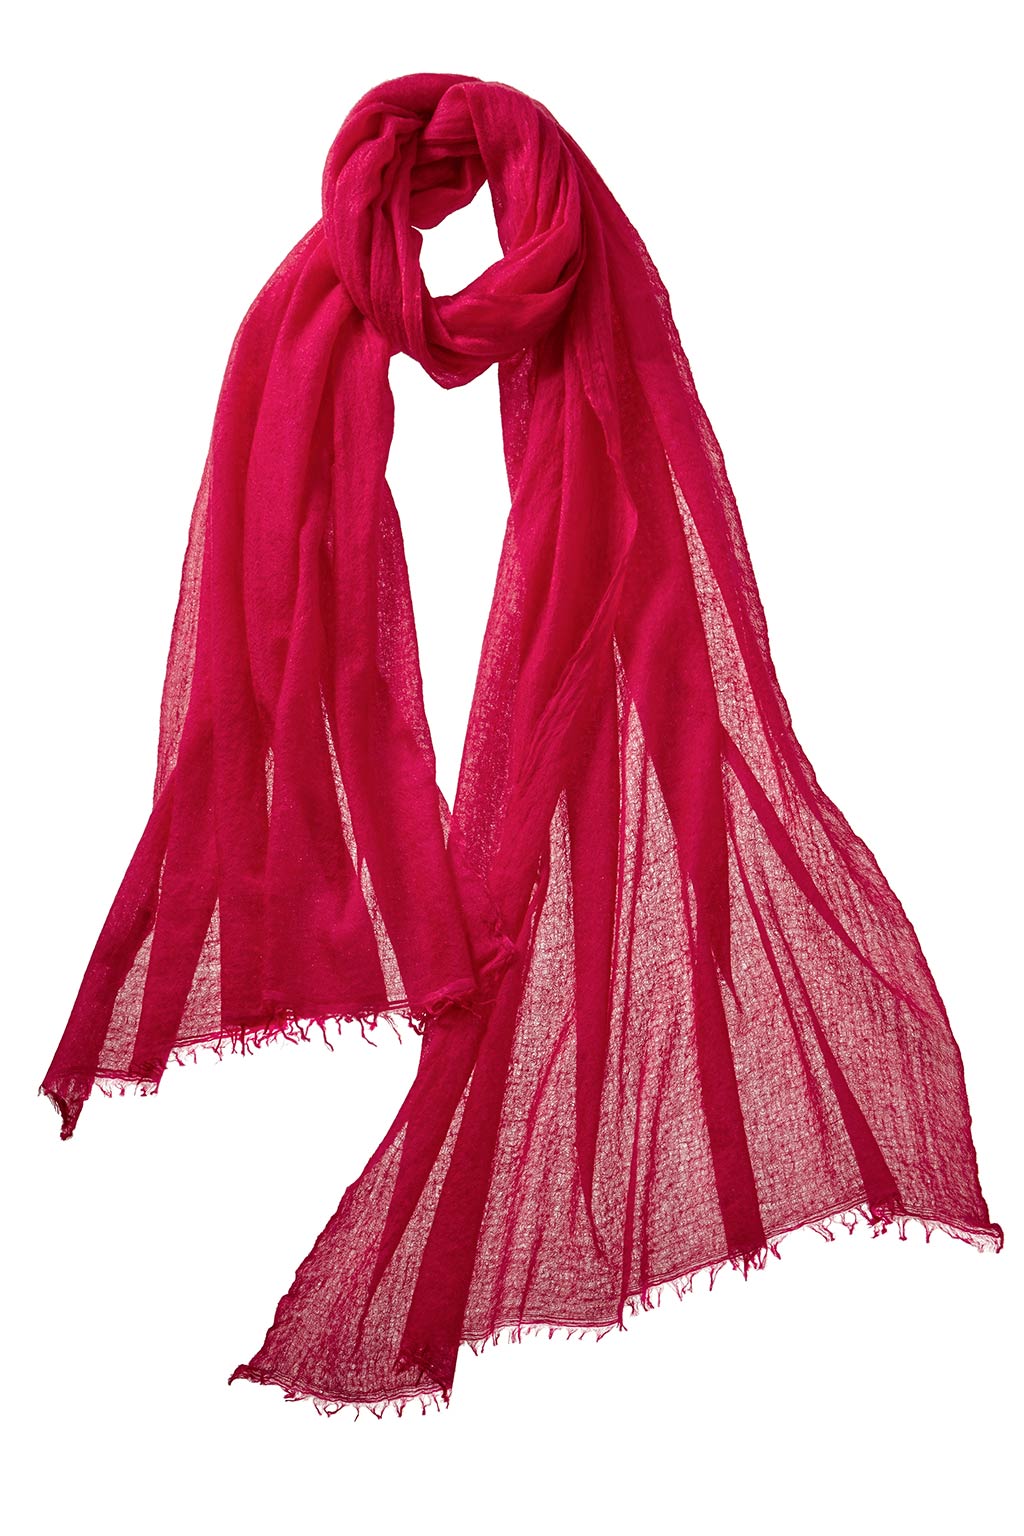 Alpine Cashmere Felted Cashmere Passport Scarf in Ruby Red